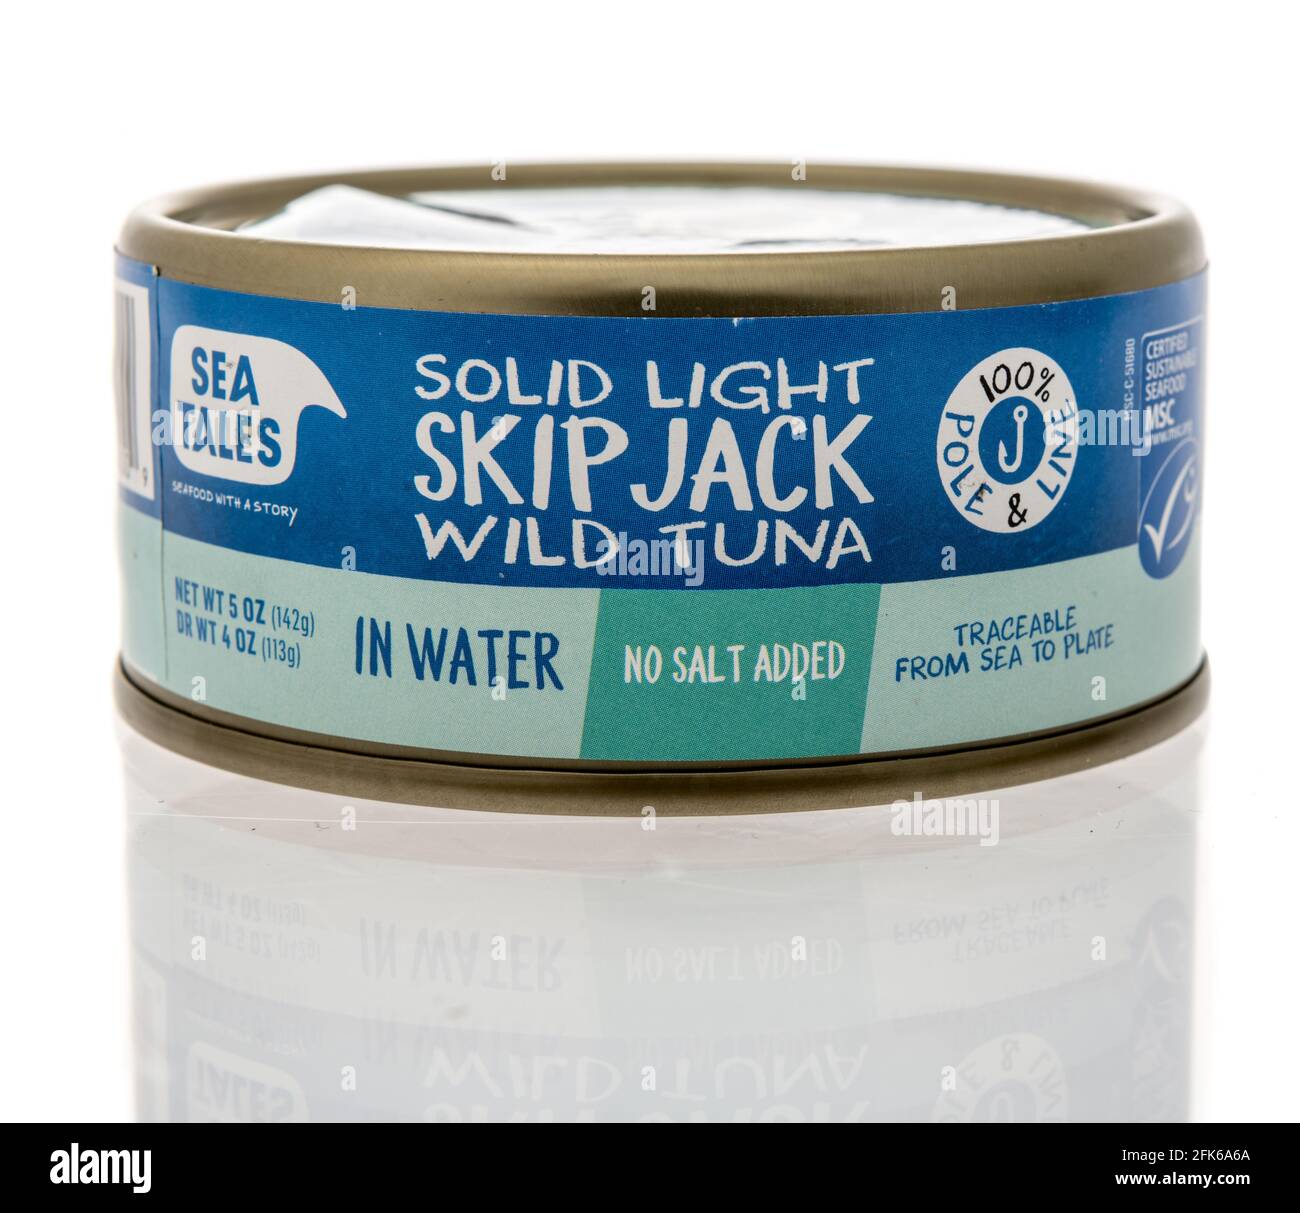 Winneconne, WI - 22 April 2021:  A package of Sea Tales solid light skip jack wild tuna on an isolated background Stock Photo